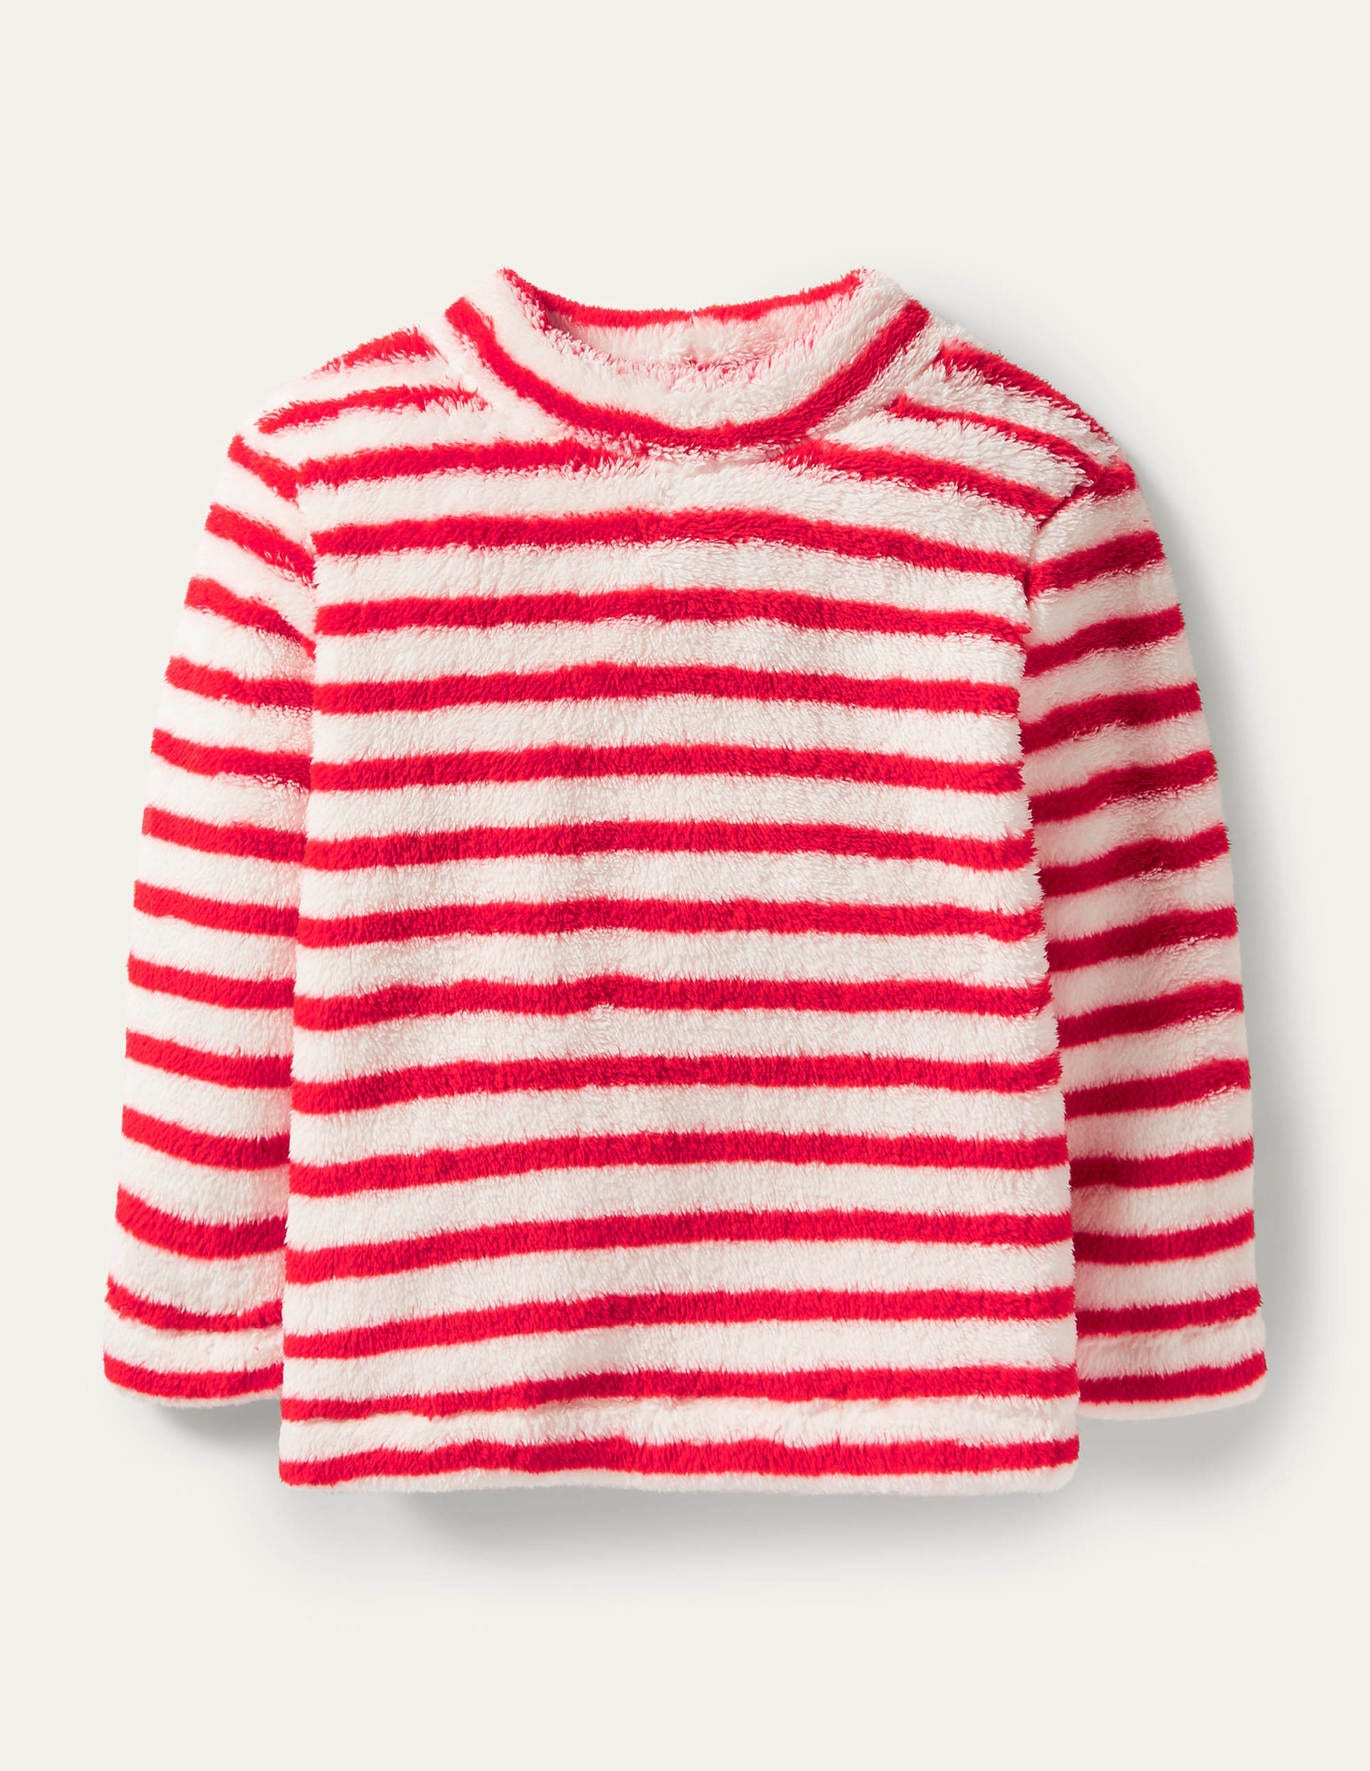 Boden Cosy Funnel Neck Top - Strawberry Tart Red/Ivory